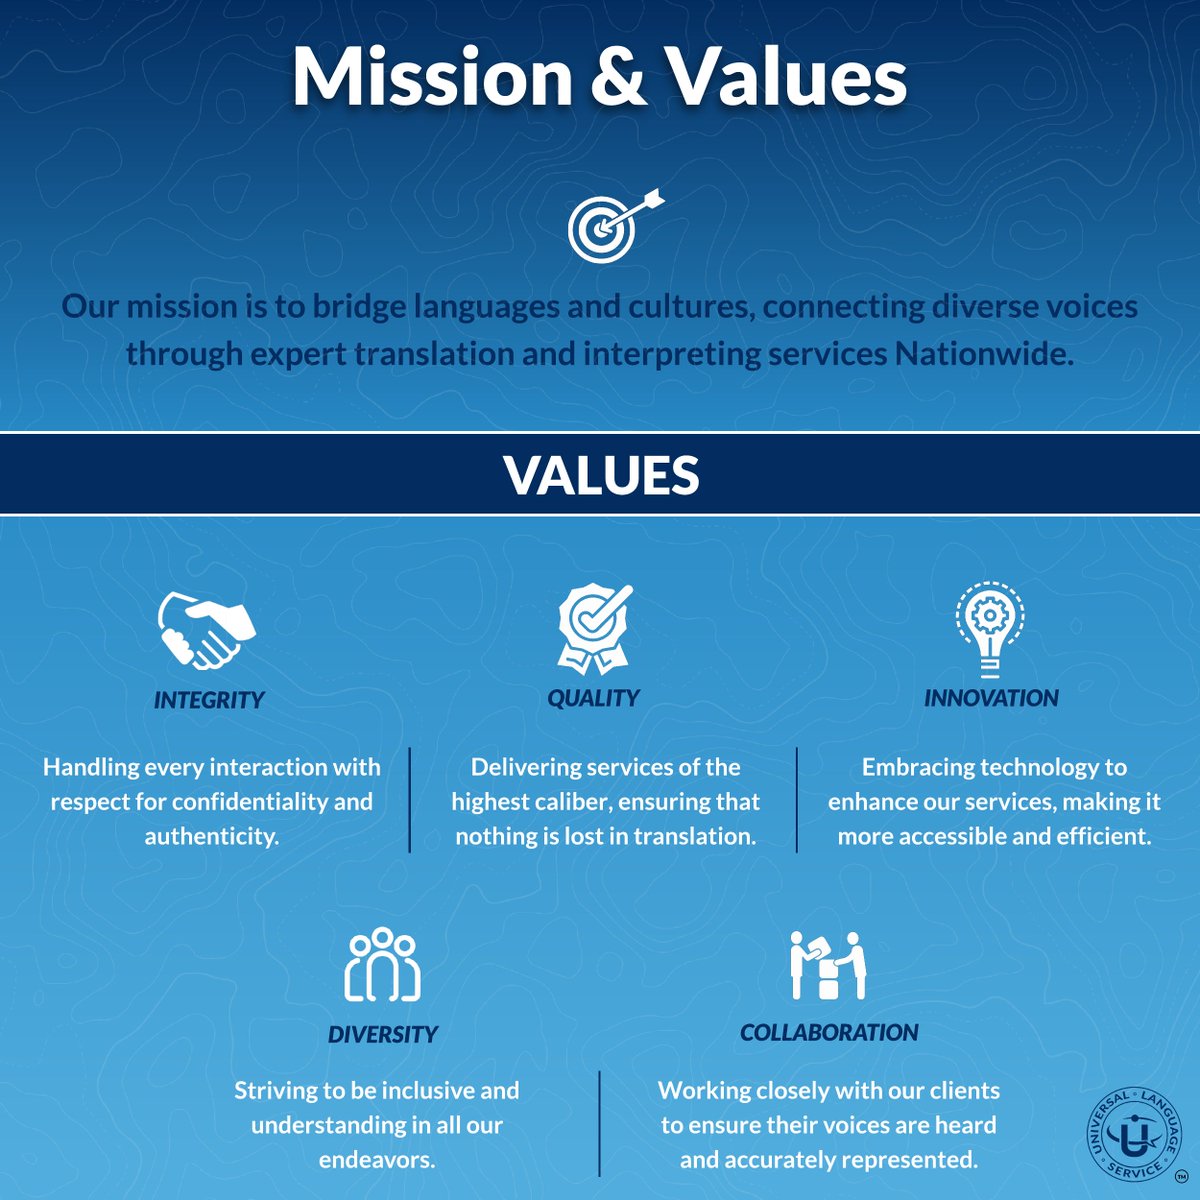 Our mission and values are the heartbeat of our services, guiding us to connect and empower communities through language every day. Dive into what makes us who we are. 🔗 universallanguageservice.com #LanguageAccess #LanguageDiversity #Interpreting #Translation #MissionandValues